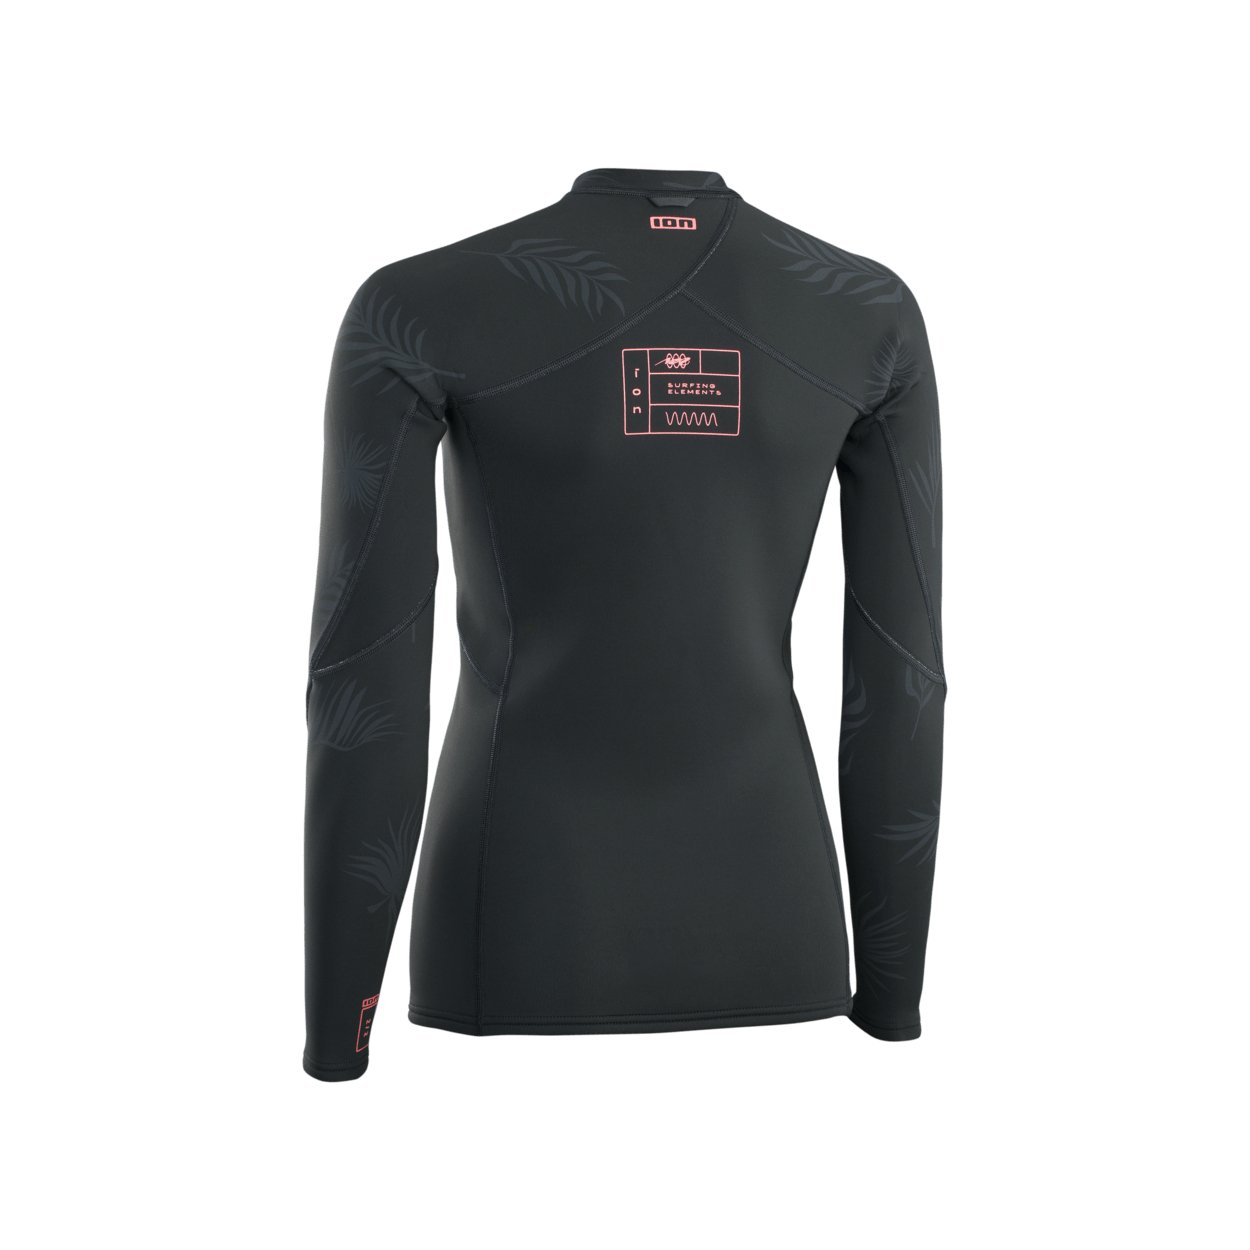 ION Neo Top 2/2 LS women 2023 - Worthing Watersports - 9010583092065 - Tops - ION Water